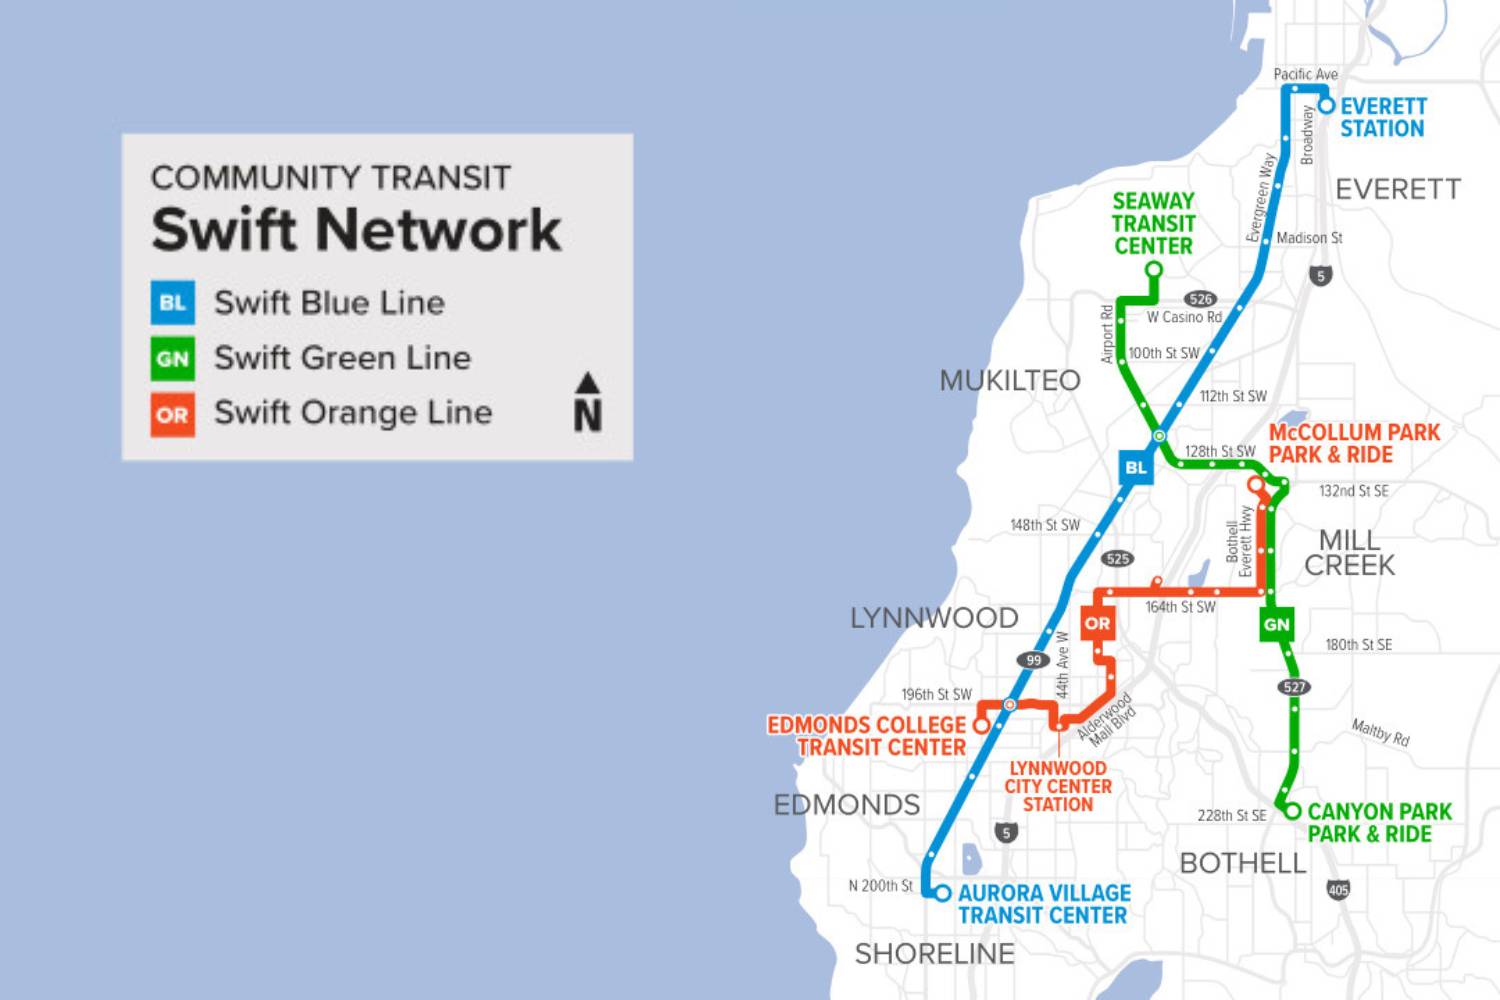 A map showing Community Transit's Swift Network of Swift Blue, Green and Orange lines.